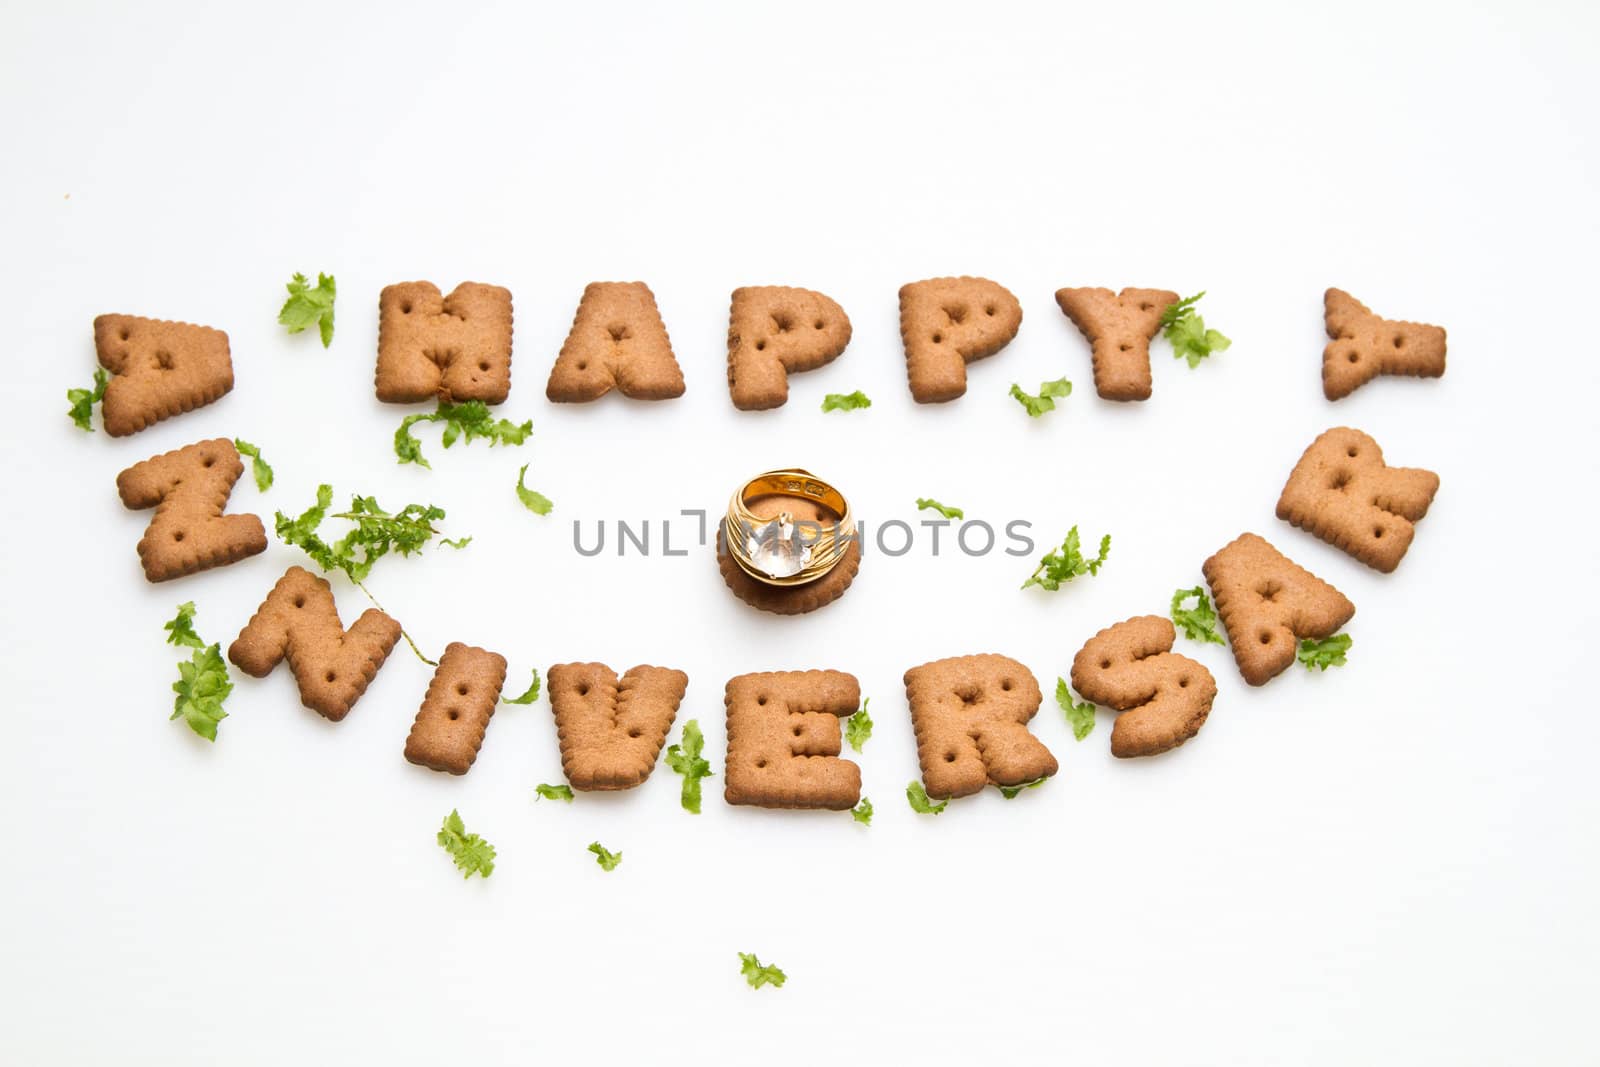 Happy anniversary wording by brown biscuits, diamond ring and green leaves on white surface